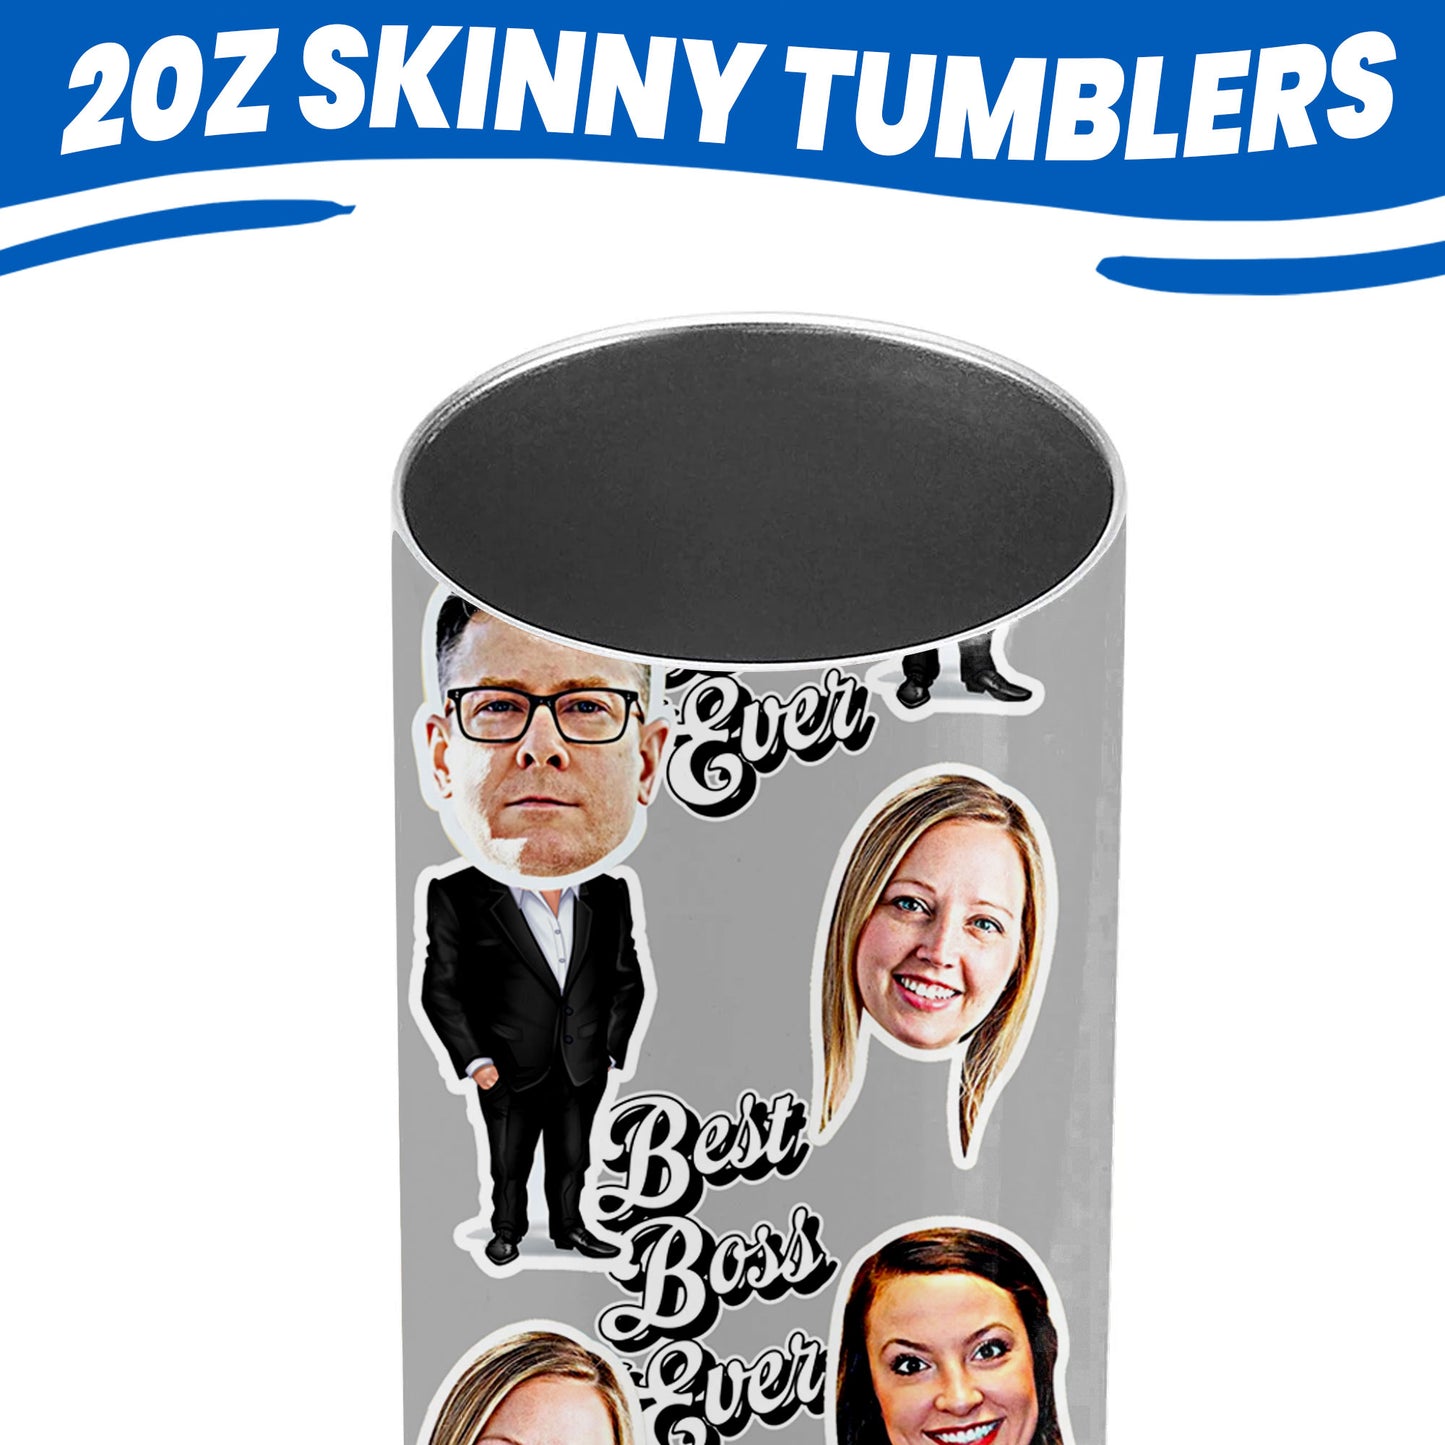 Personalized boss gift tumblers with faces close up to see the inside of the metal tumbler with can fit 20 ounces of liquid